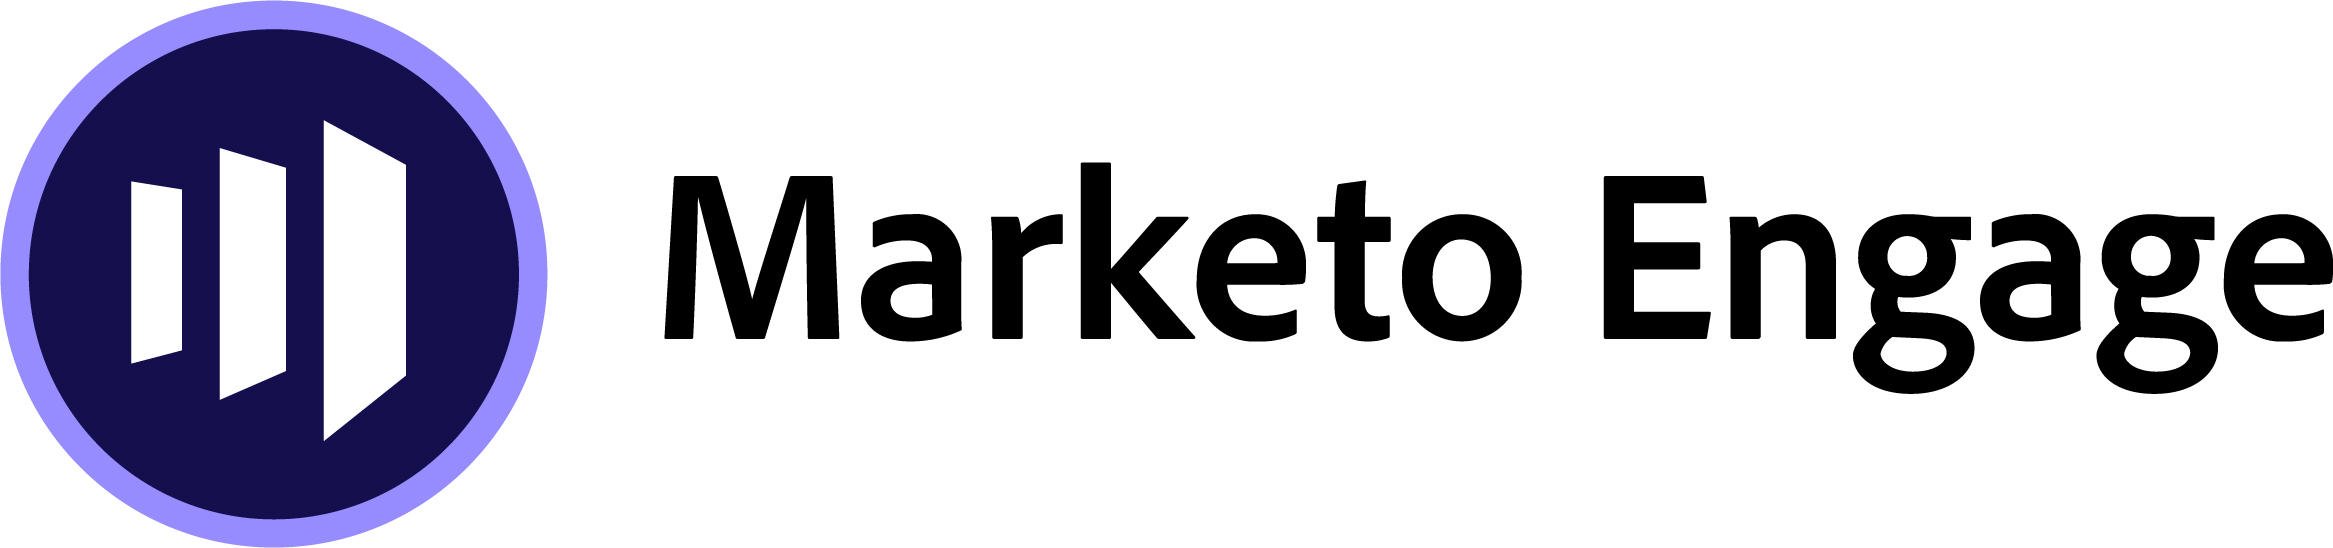 Marketo Reviews & Ratings from Users | SaasList